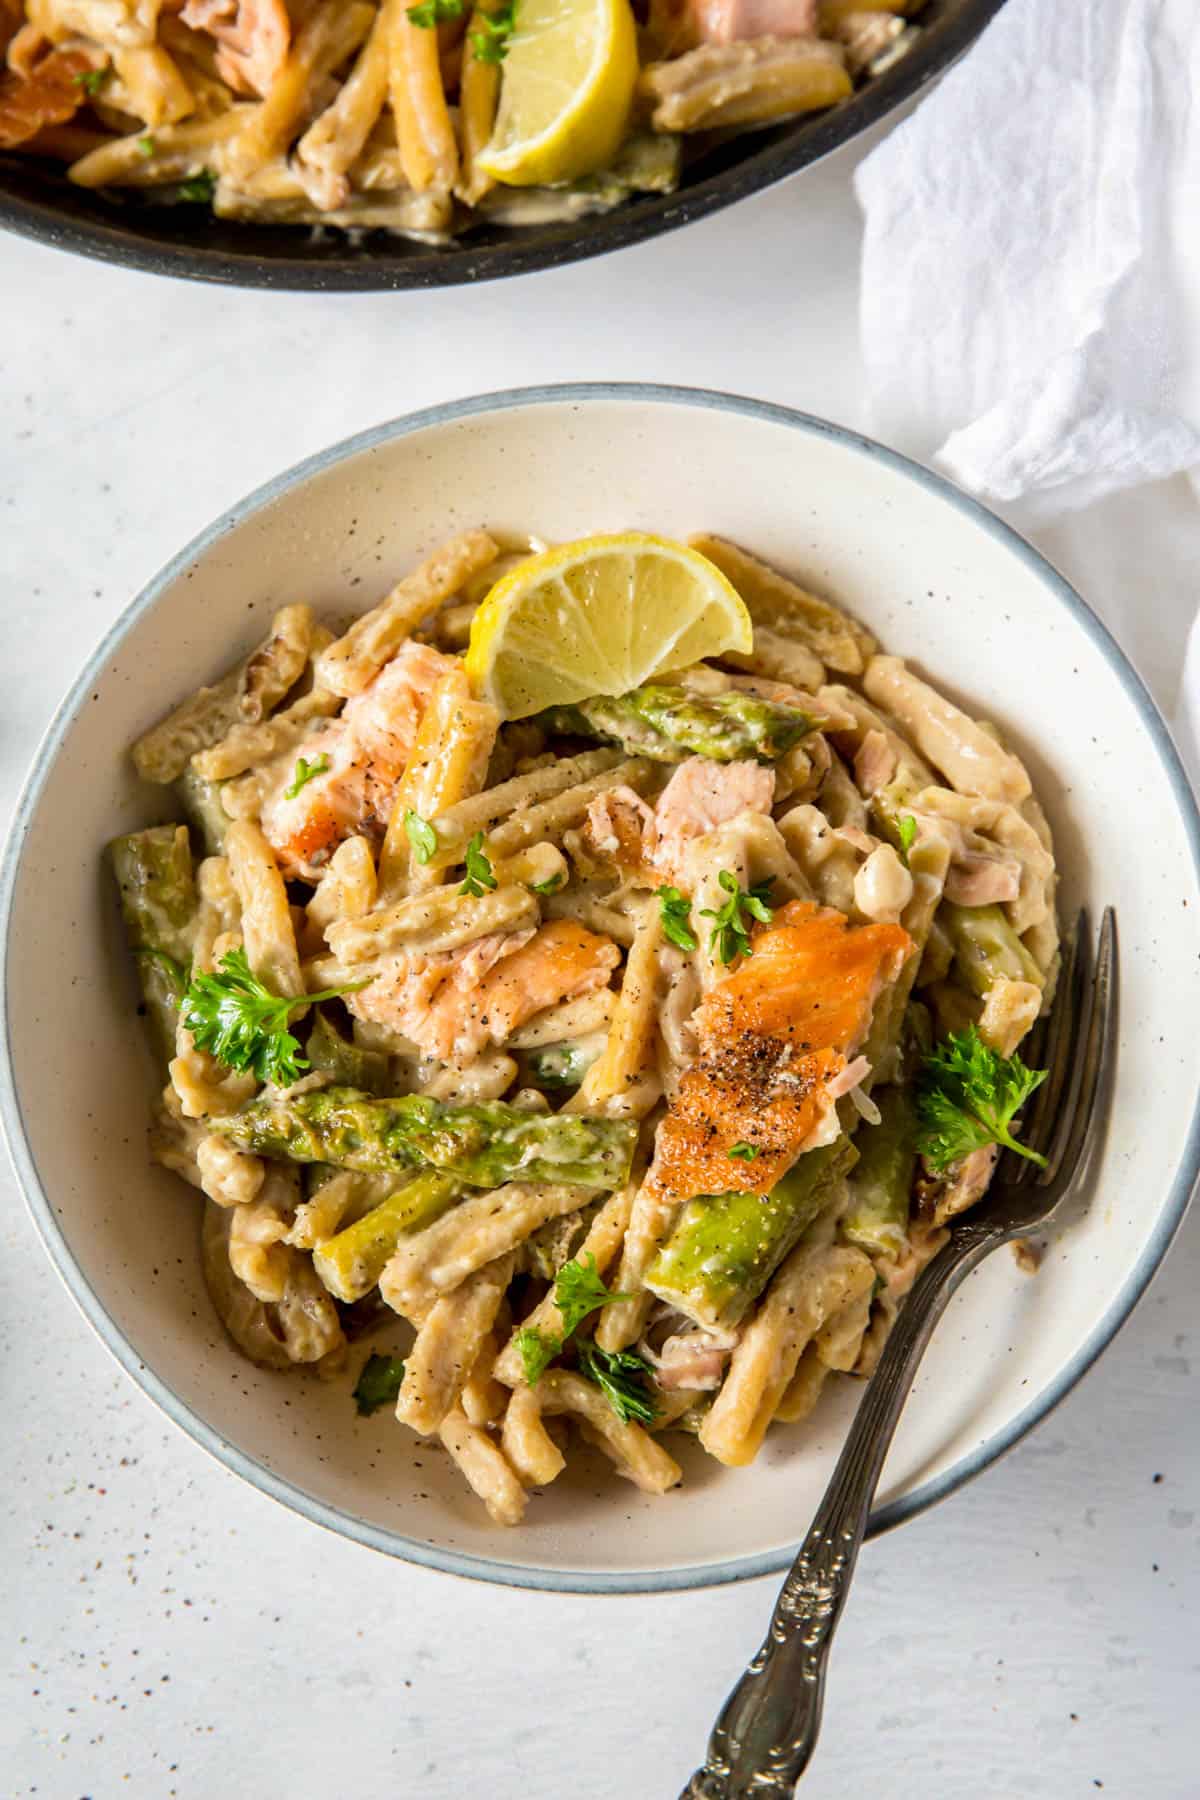 A white bowl filled with cooked creamy salmon pasta. A fork rests in the bowl and a lemon wedge is sitting on the top of the pasta.